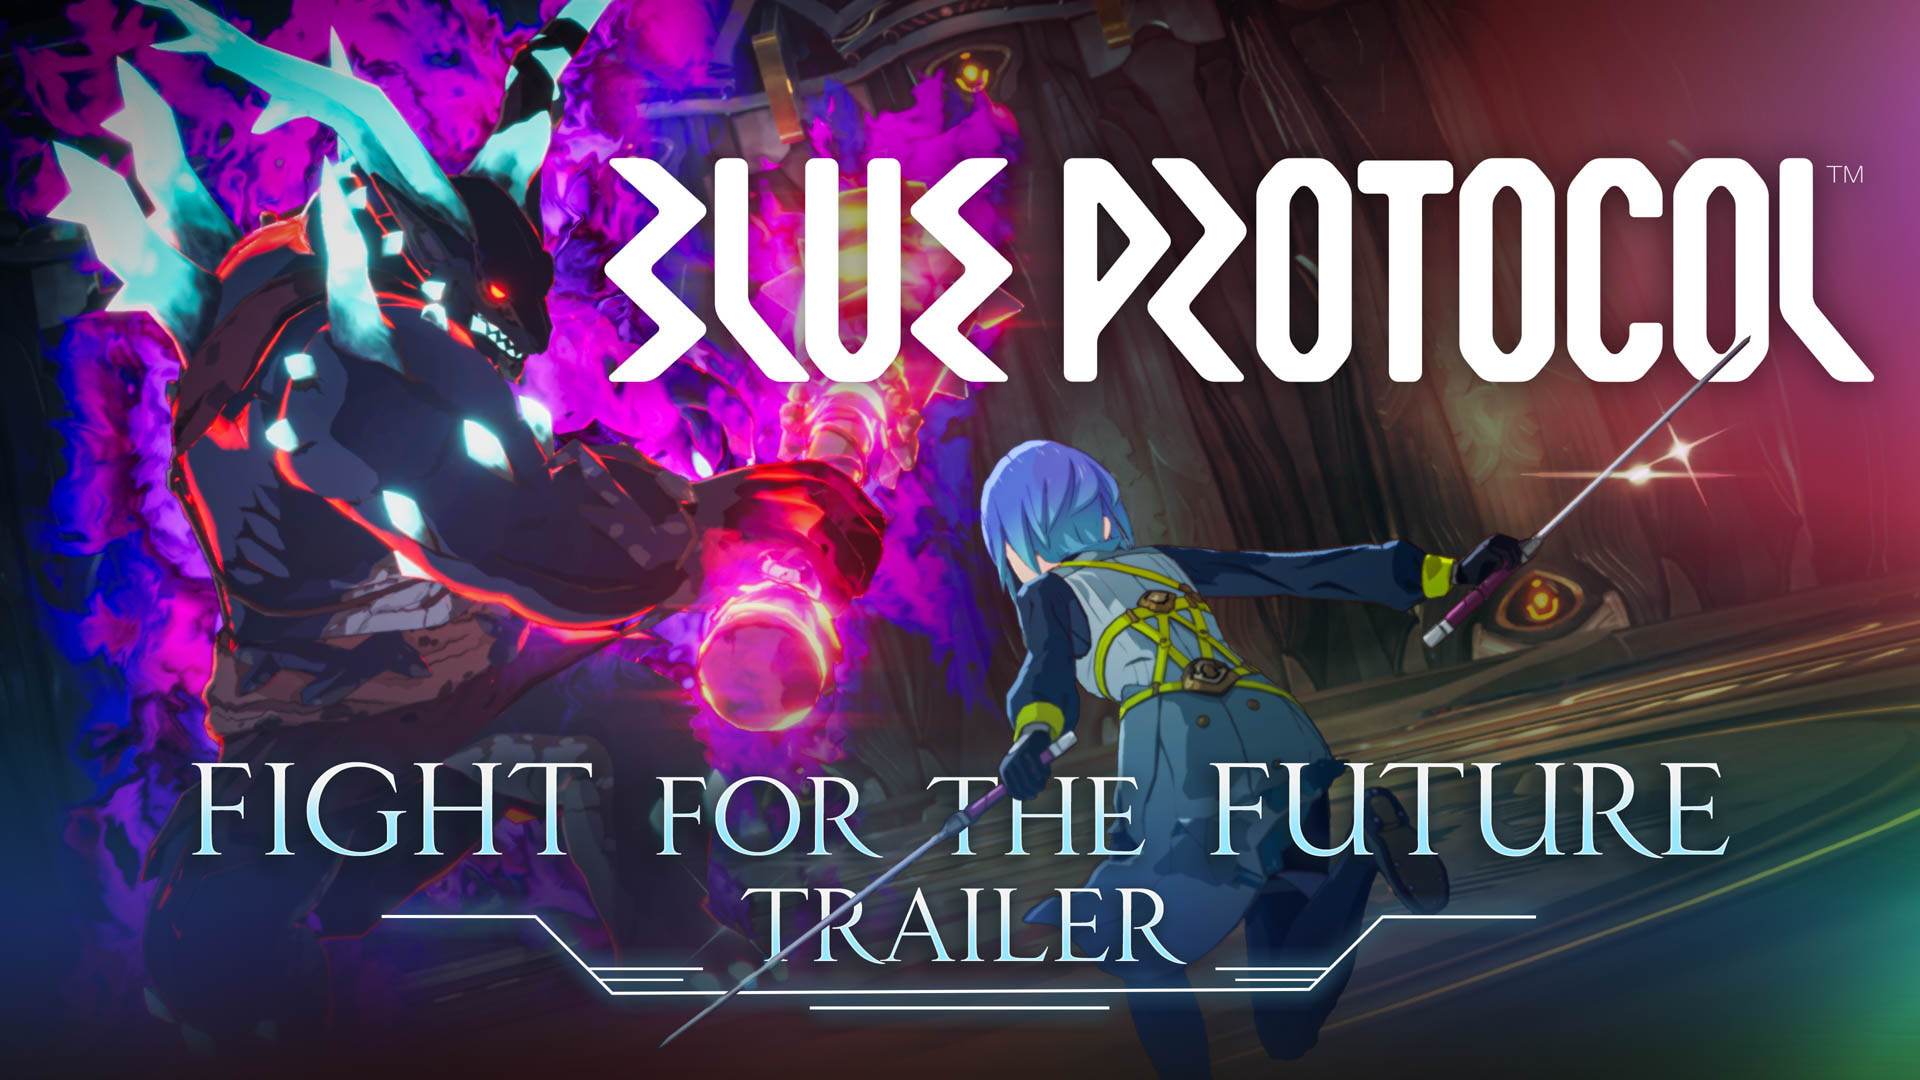 Blue Protocol Gets its First Gameplay Trailer and New Screenshots